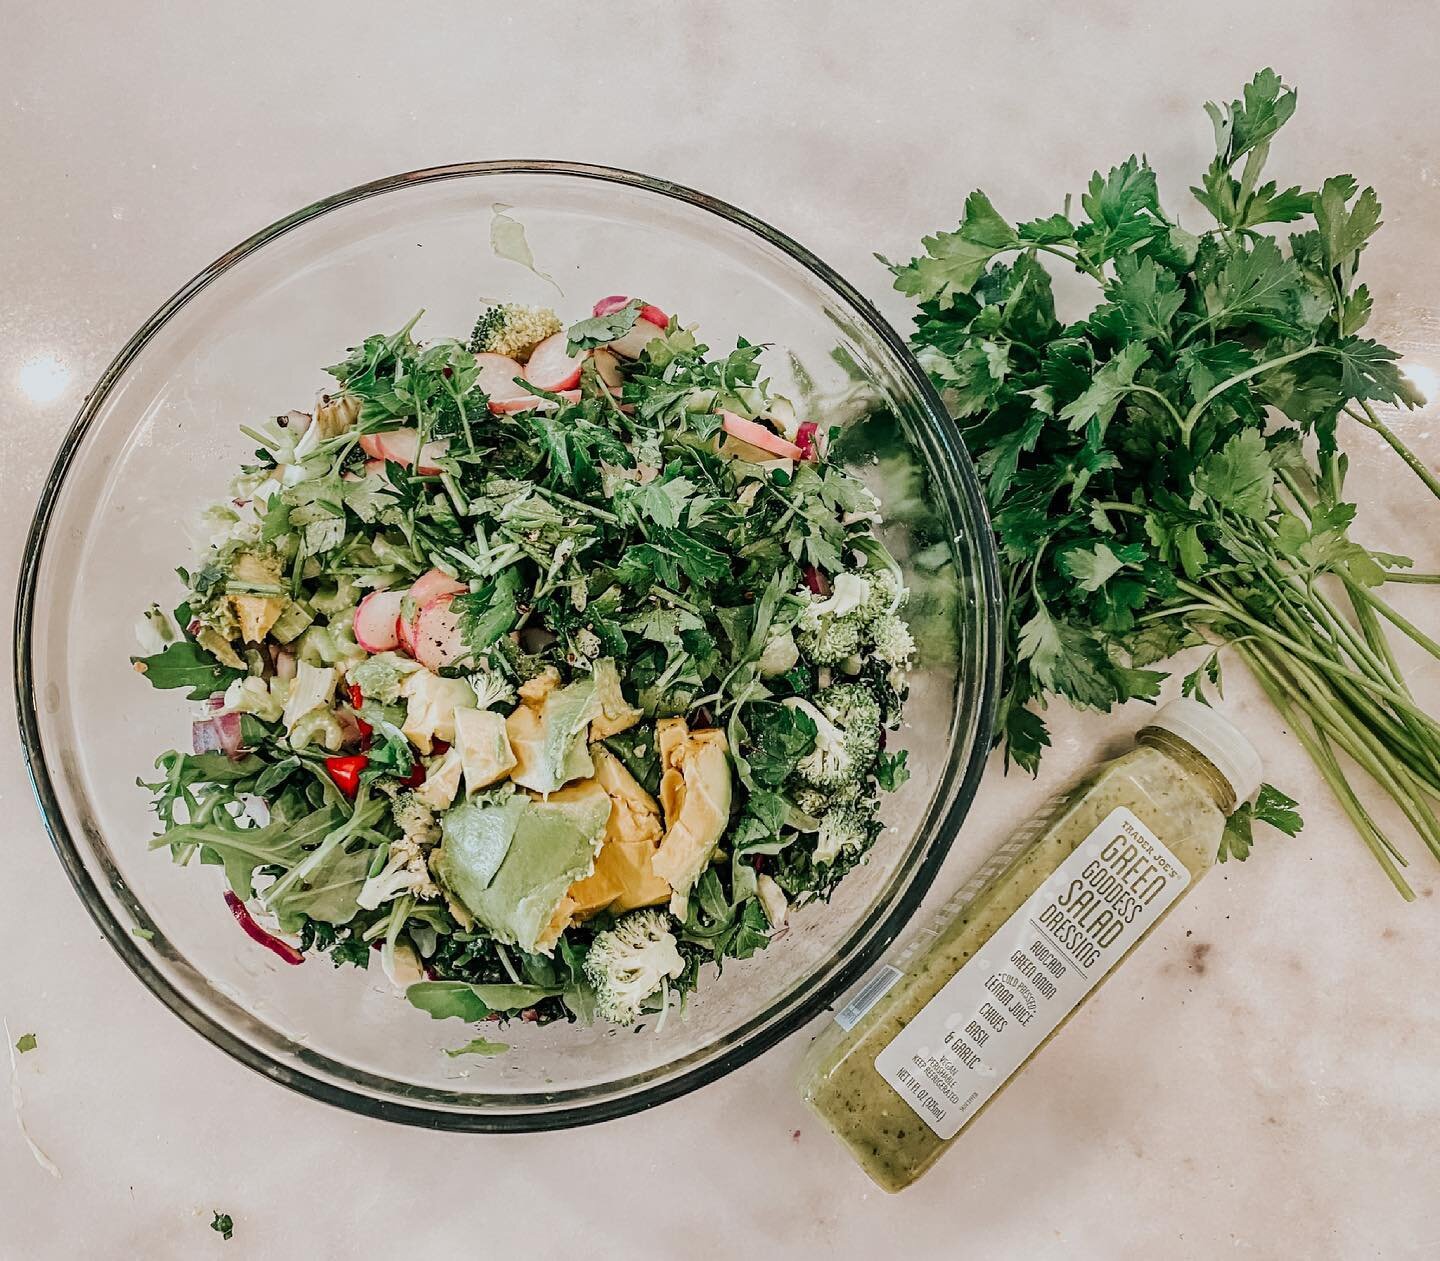 Chopped summer salad perfect for hosting family and friends this weekend or when all your raw greens are about to go bad is now on my site! I prepared this salad with @traderjoes green goddess dressing and served it with their buffalo hummus dip 😋😋